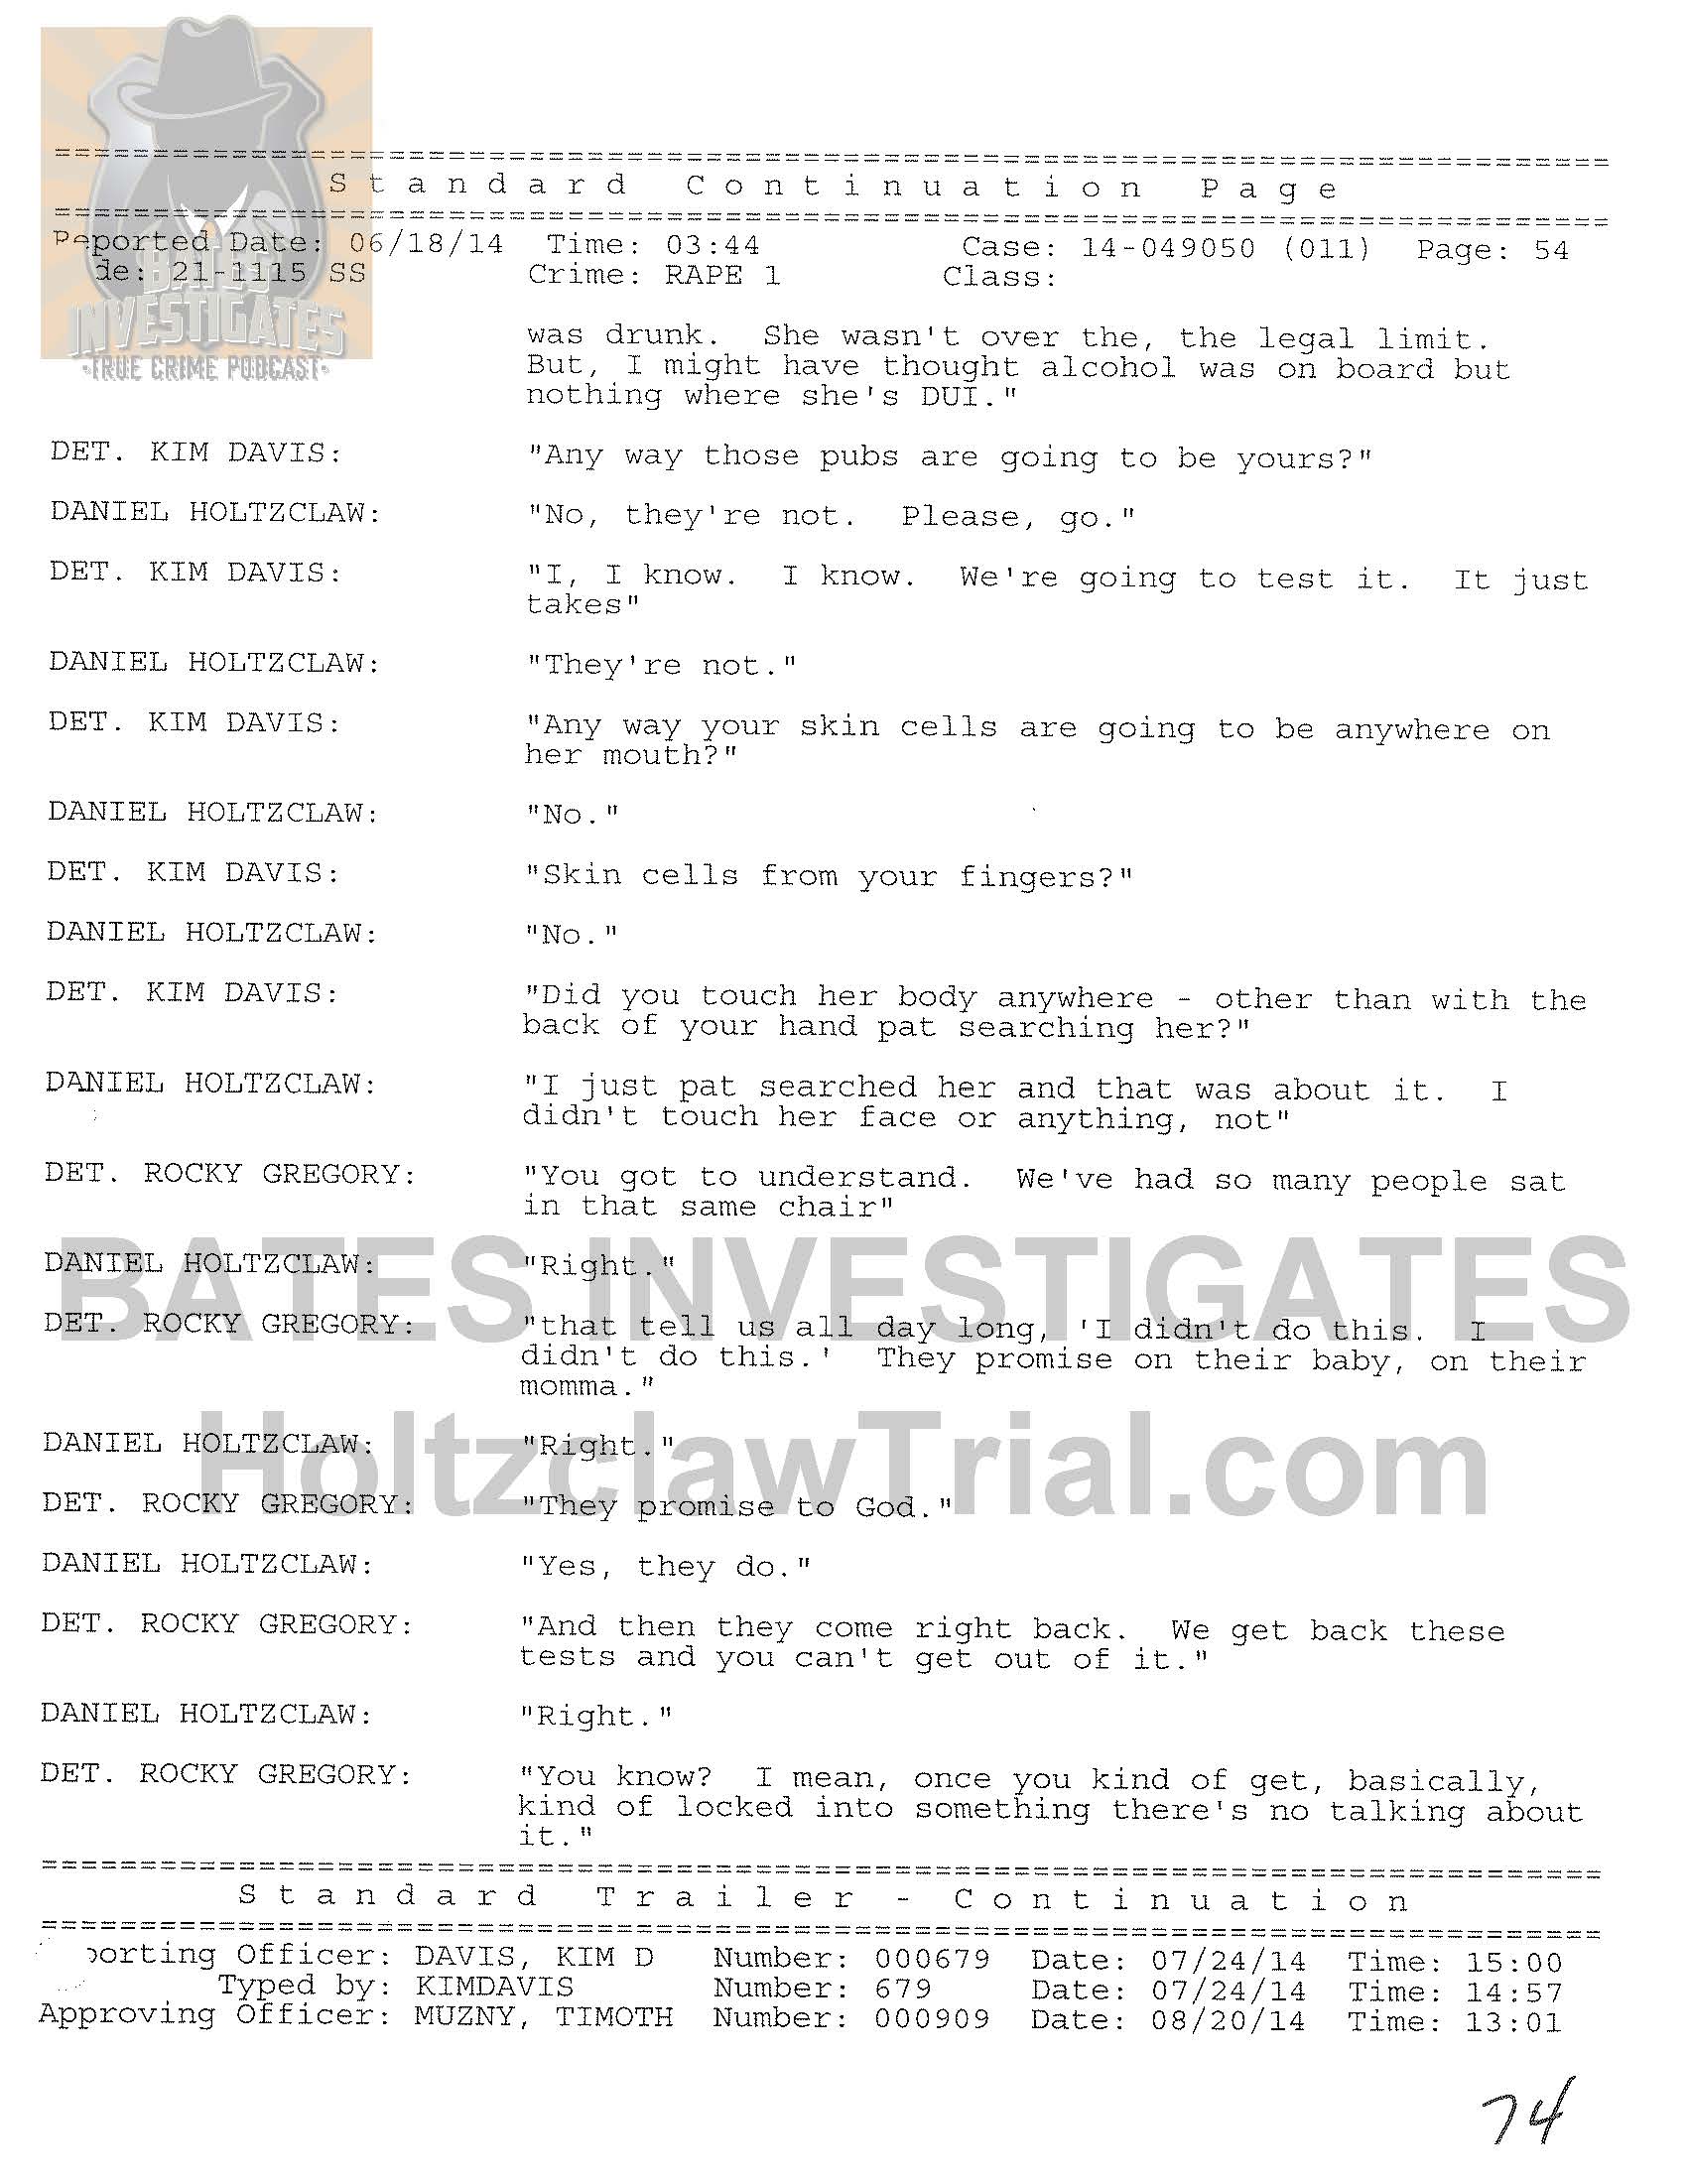 Holtzclaw Interrogation Transcript - Ep02 Redacted_Page_54.jpg